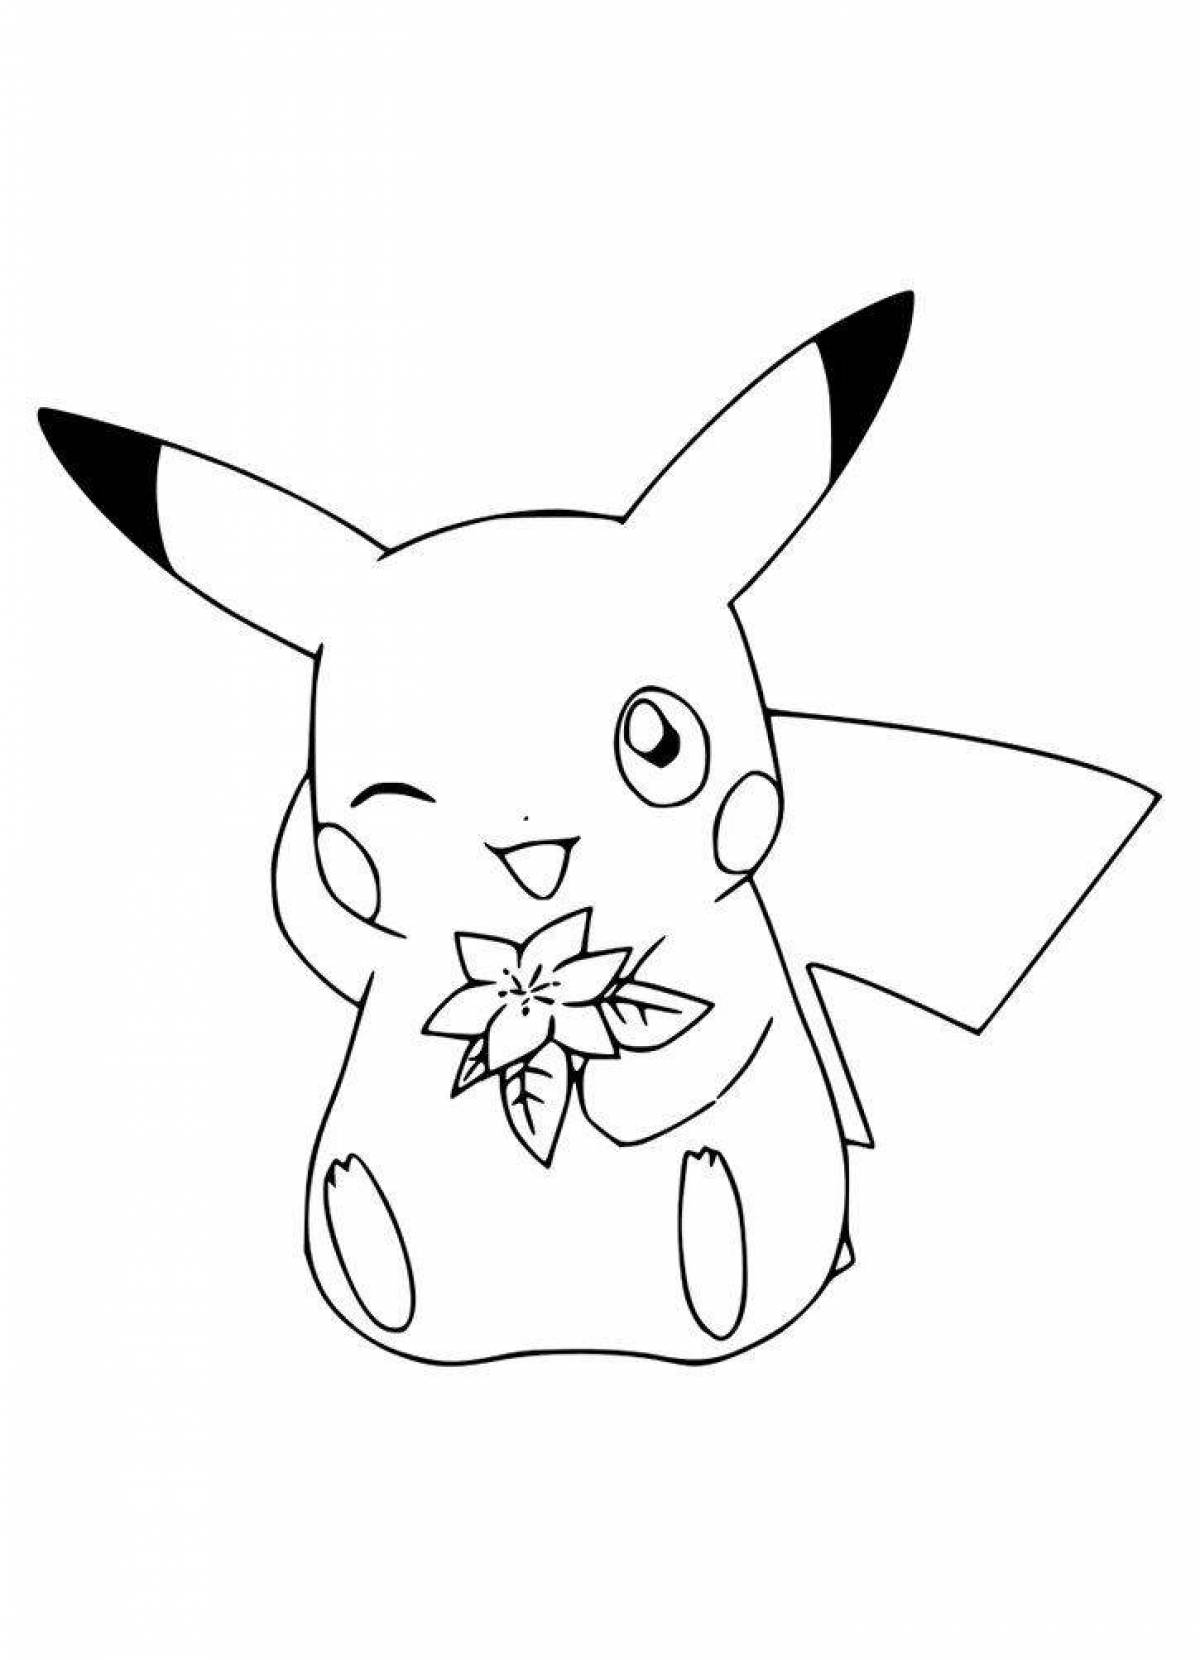 Charming pikachu coloring page